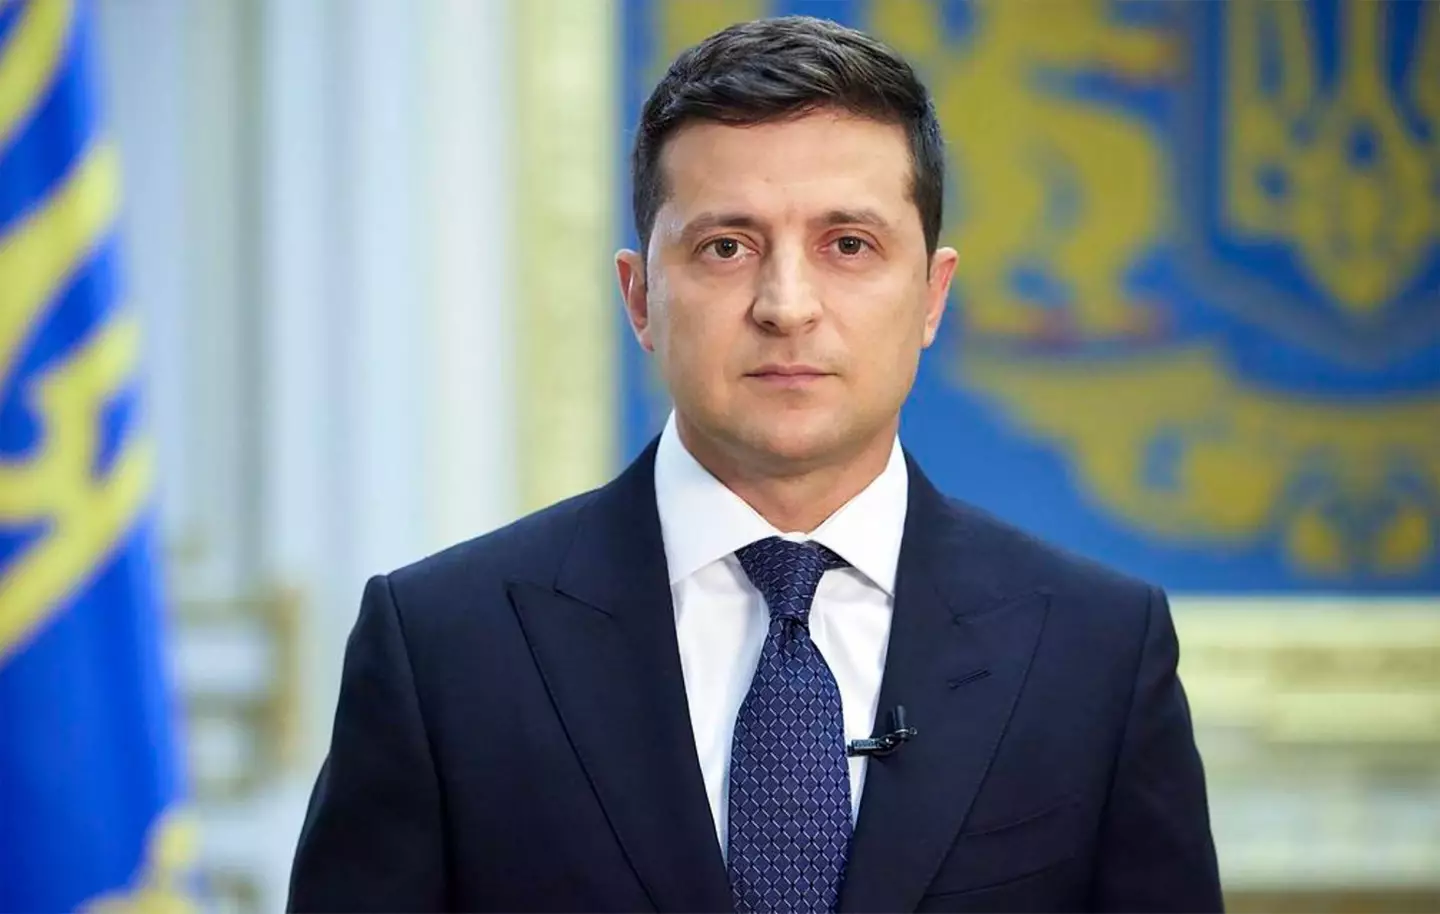 Volodymyr Zelensky has said the world was ‘one step away’ from nuclear disaster.